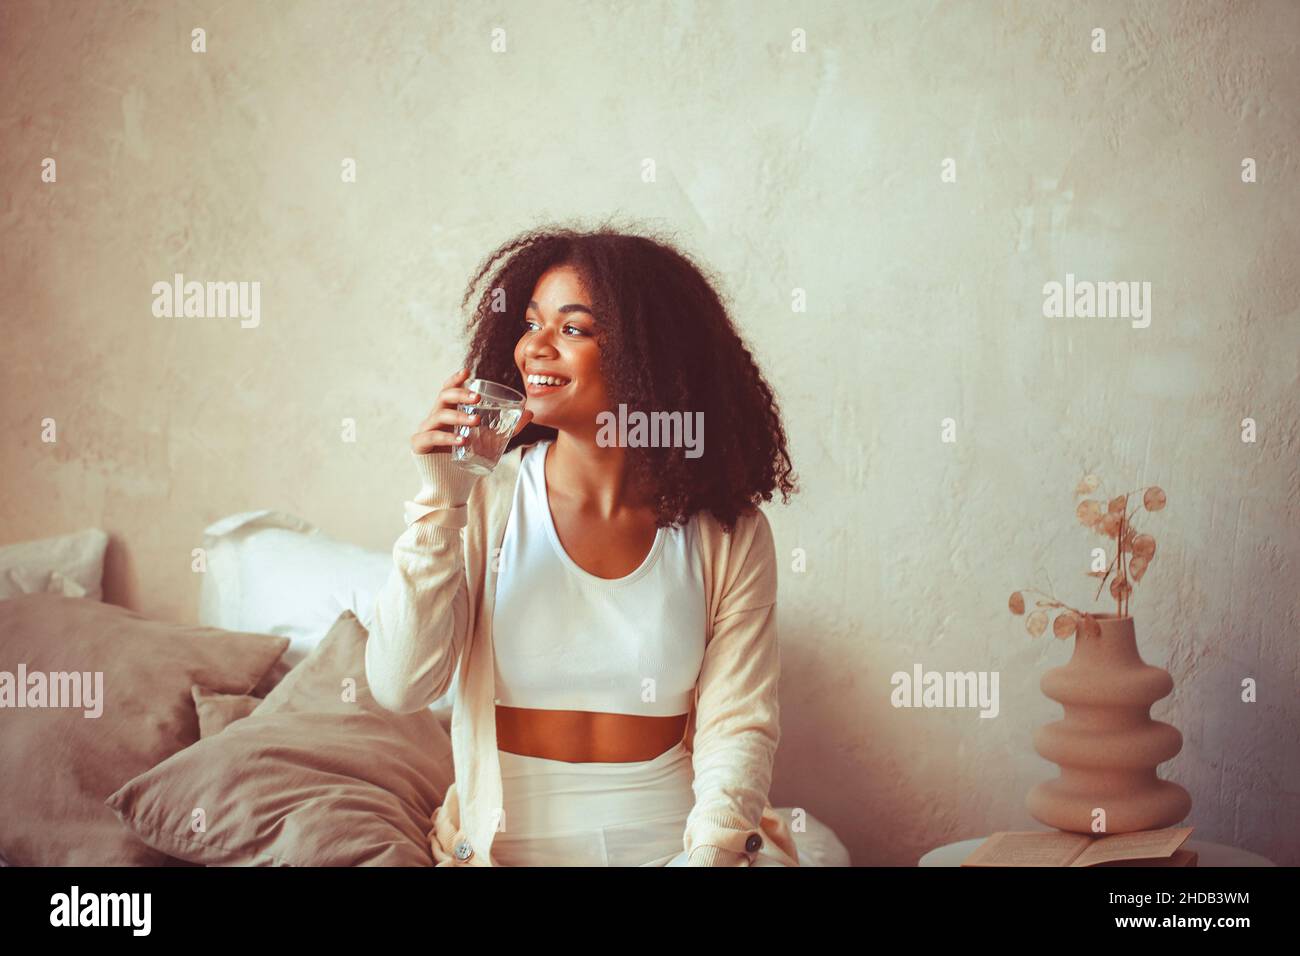 brunette smiling woman wearing black bra lying on the bed using mobile  phone touching screen Stock Photo - Alamy